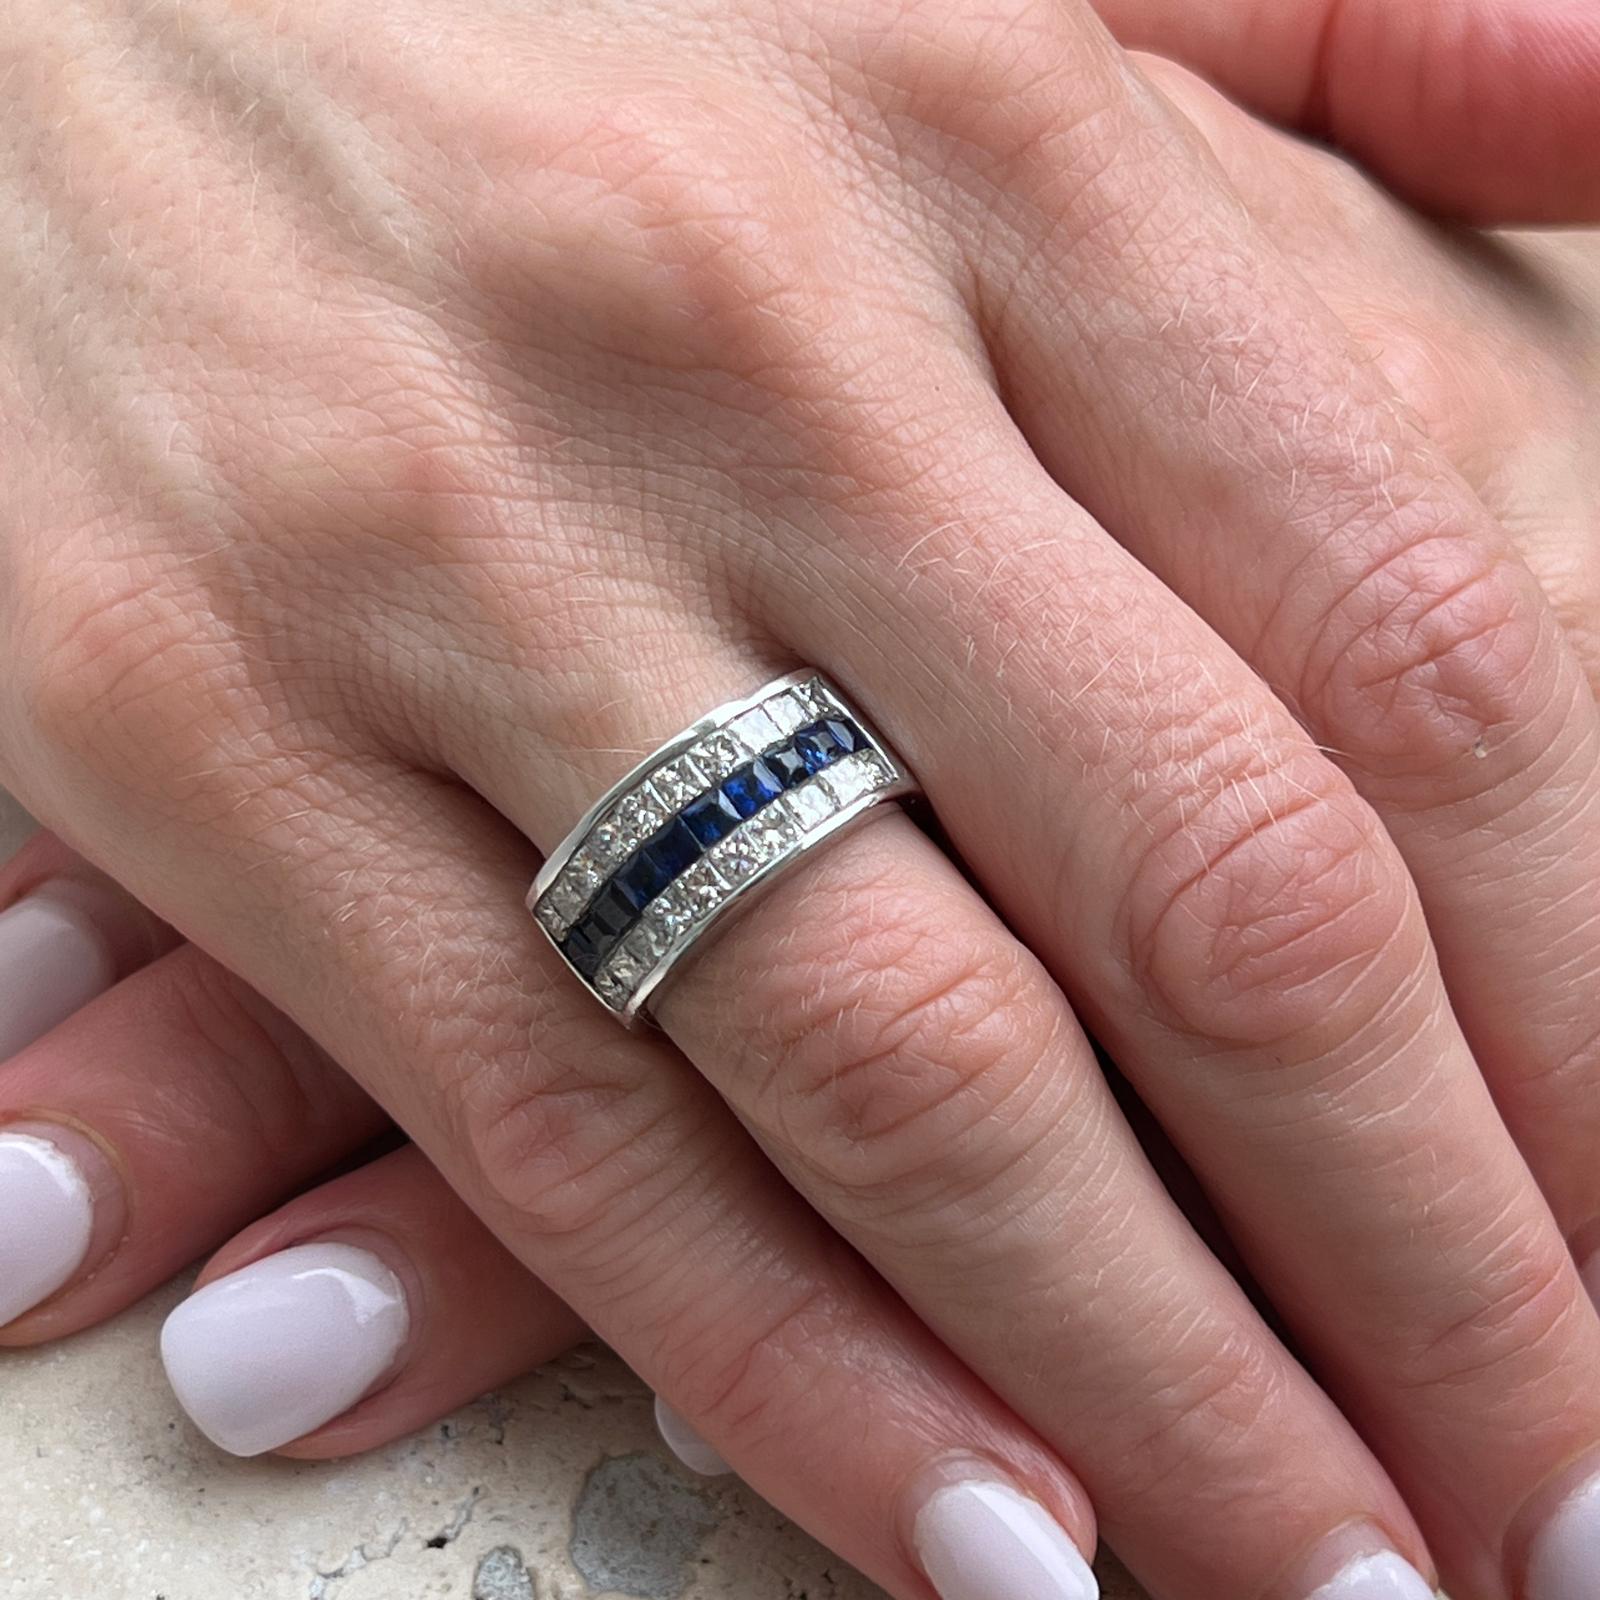 Diamond and blue sapphire invisibly set wedding band crafted in 14 karat white gold. The band features princess cut diamonds weighing approximately 1.60 carat total weight and 10 natural blue square cut sapphires weighing approximately 1.10 CTW. The